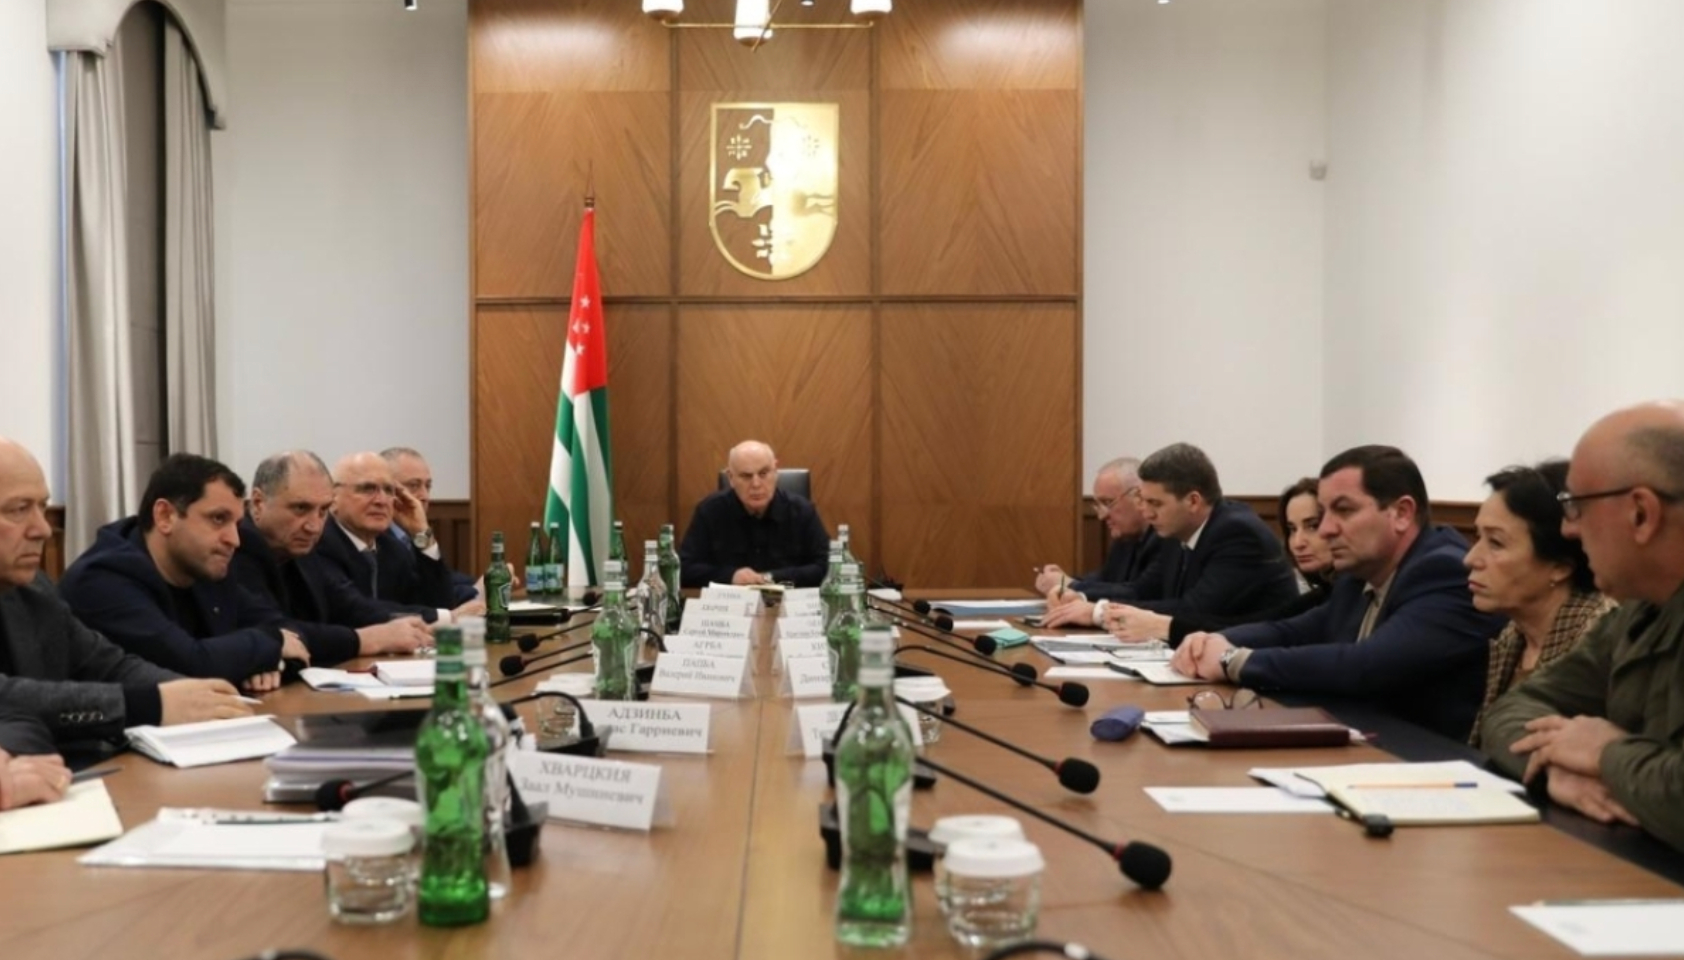 President Aslan Bzhania in a Meeting with Government Members and Law Enforcement Agency Heads